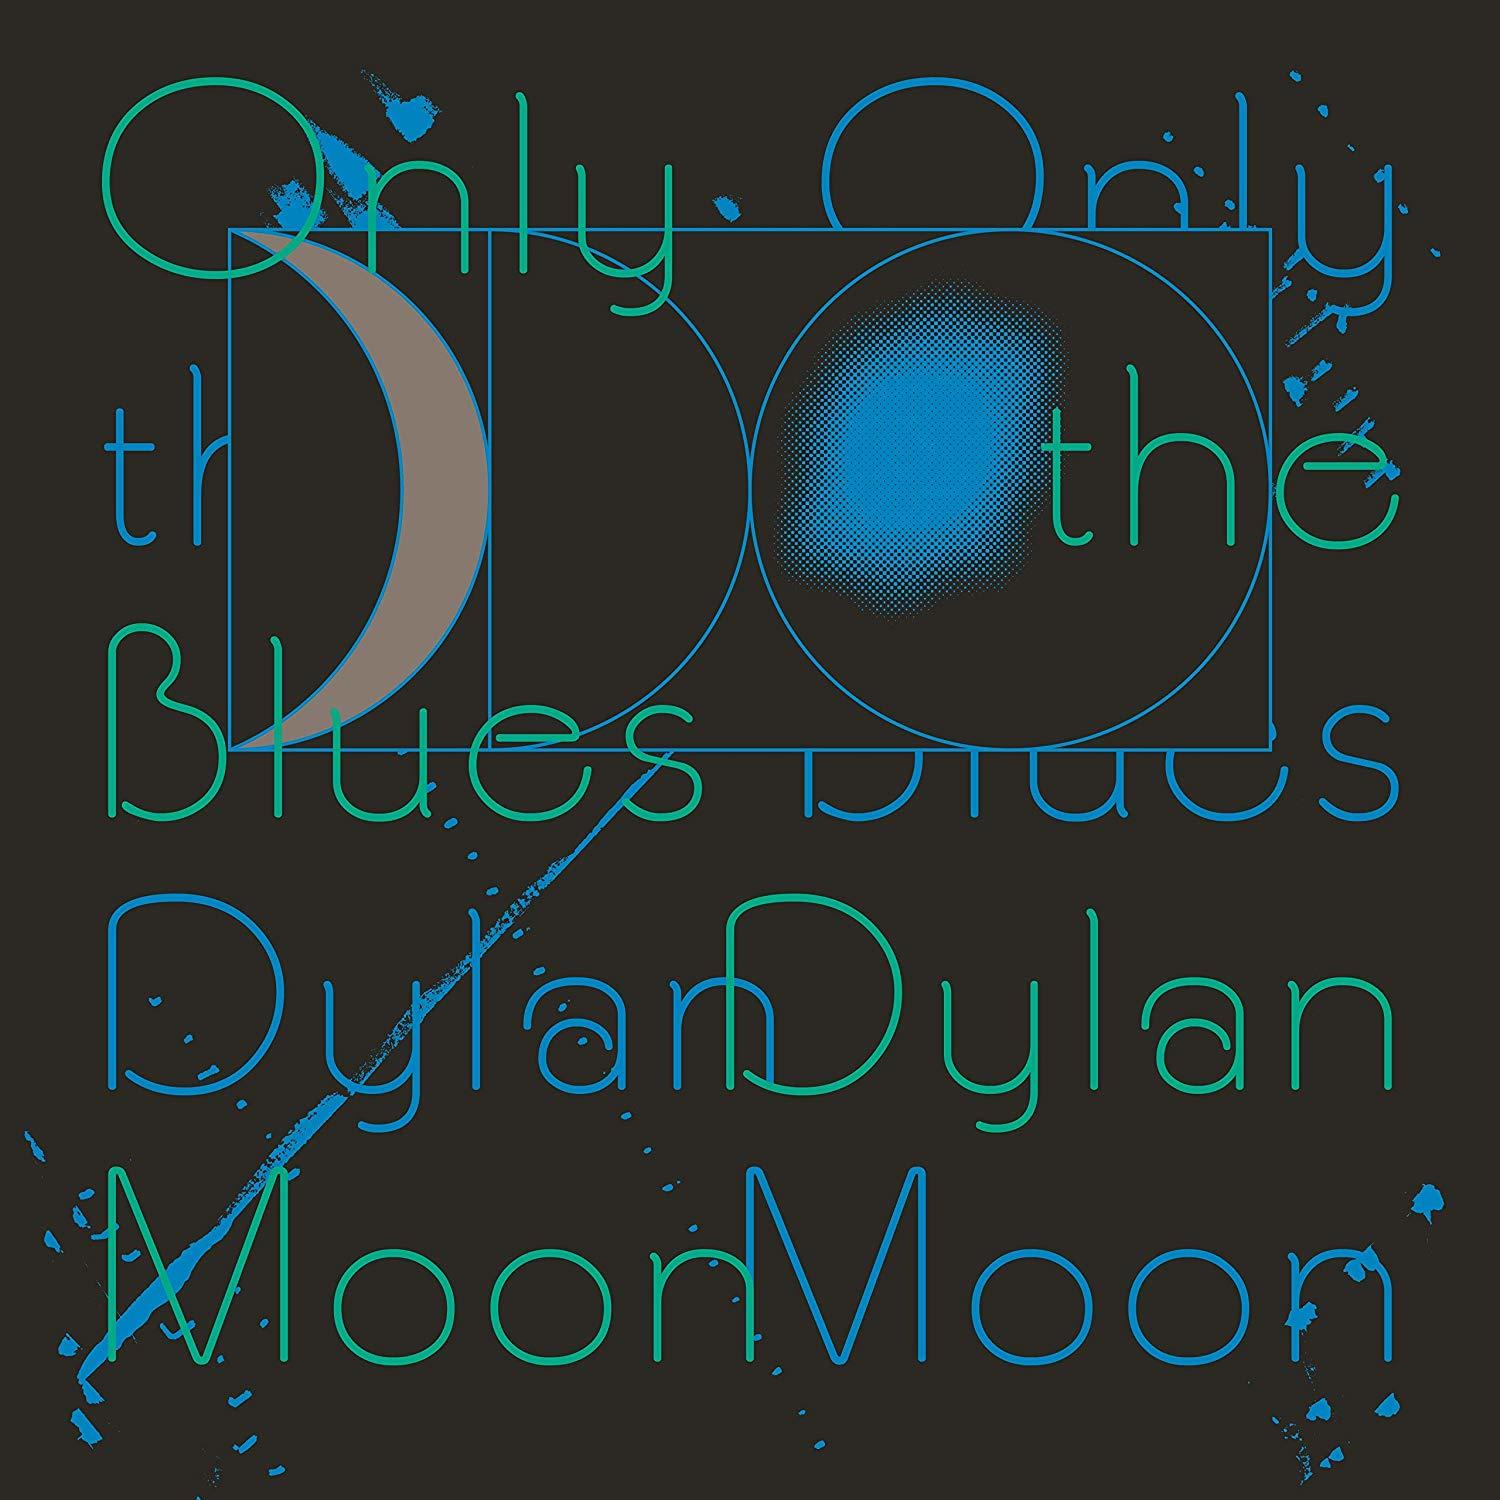 The Dylan - - Blues Moon Only (Vinyl)